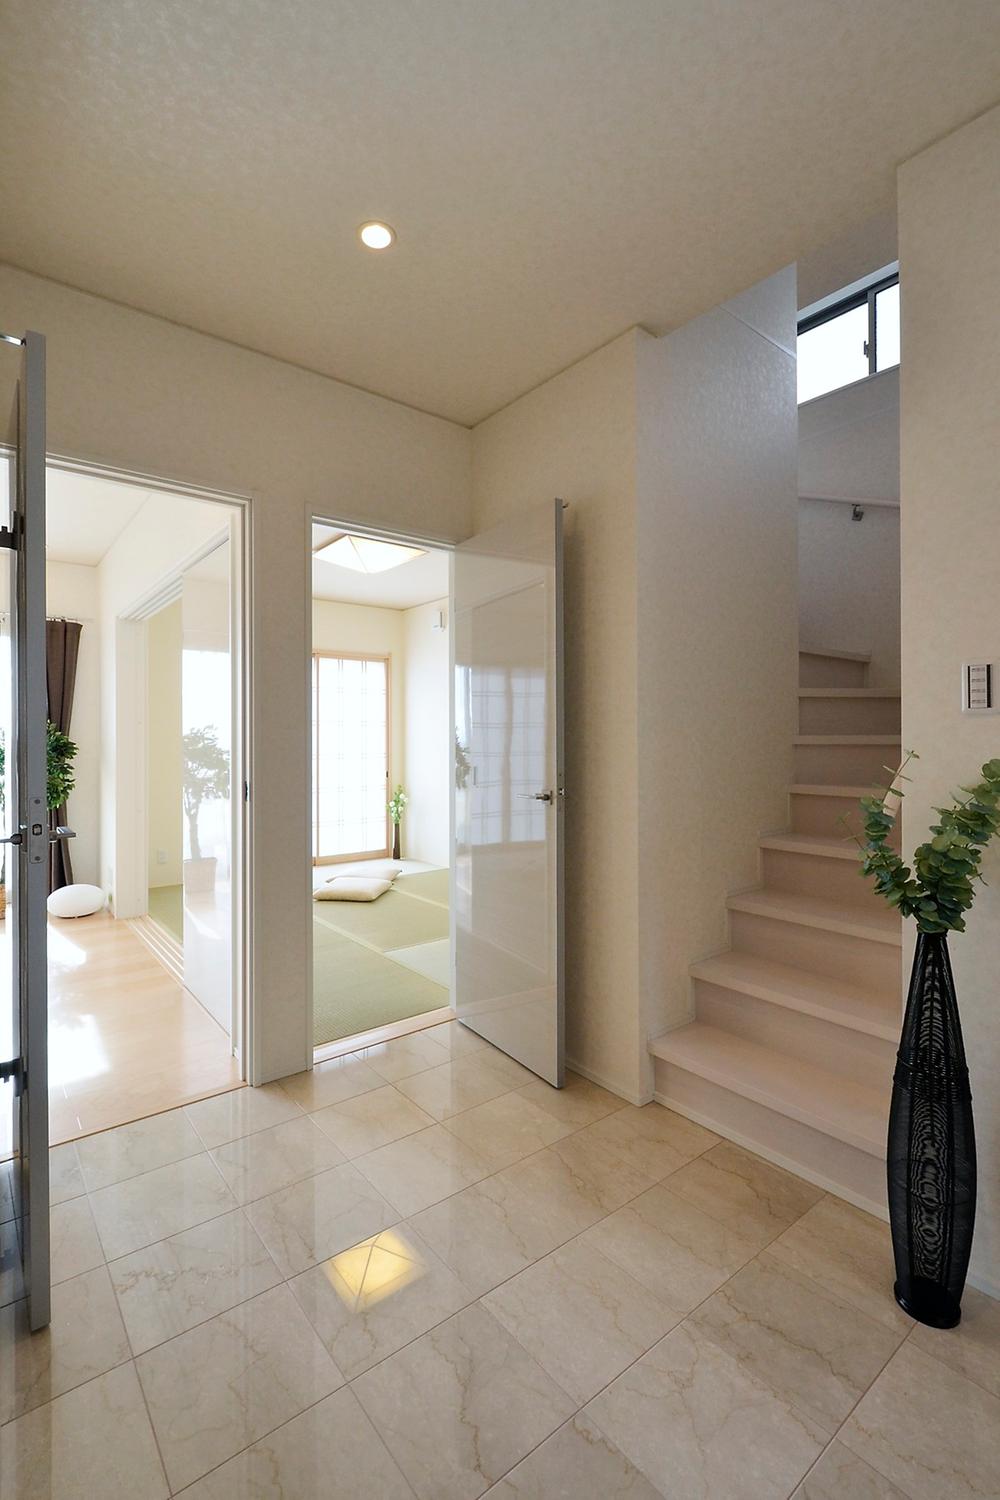 Entrance. Marble is affixed to the floor, Spacious entrance large shoes BOX also been installed (model house shooting)